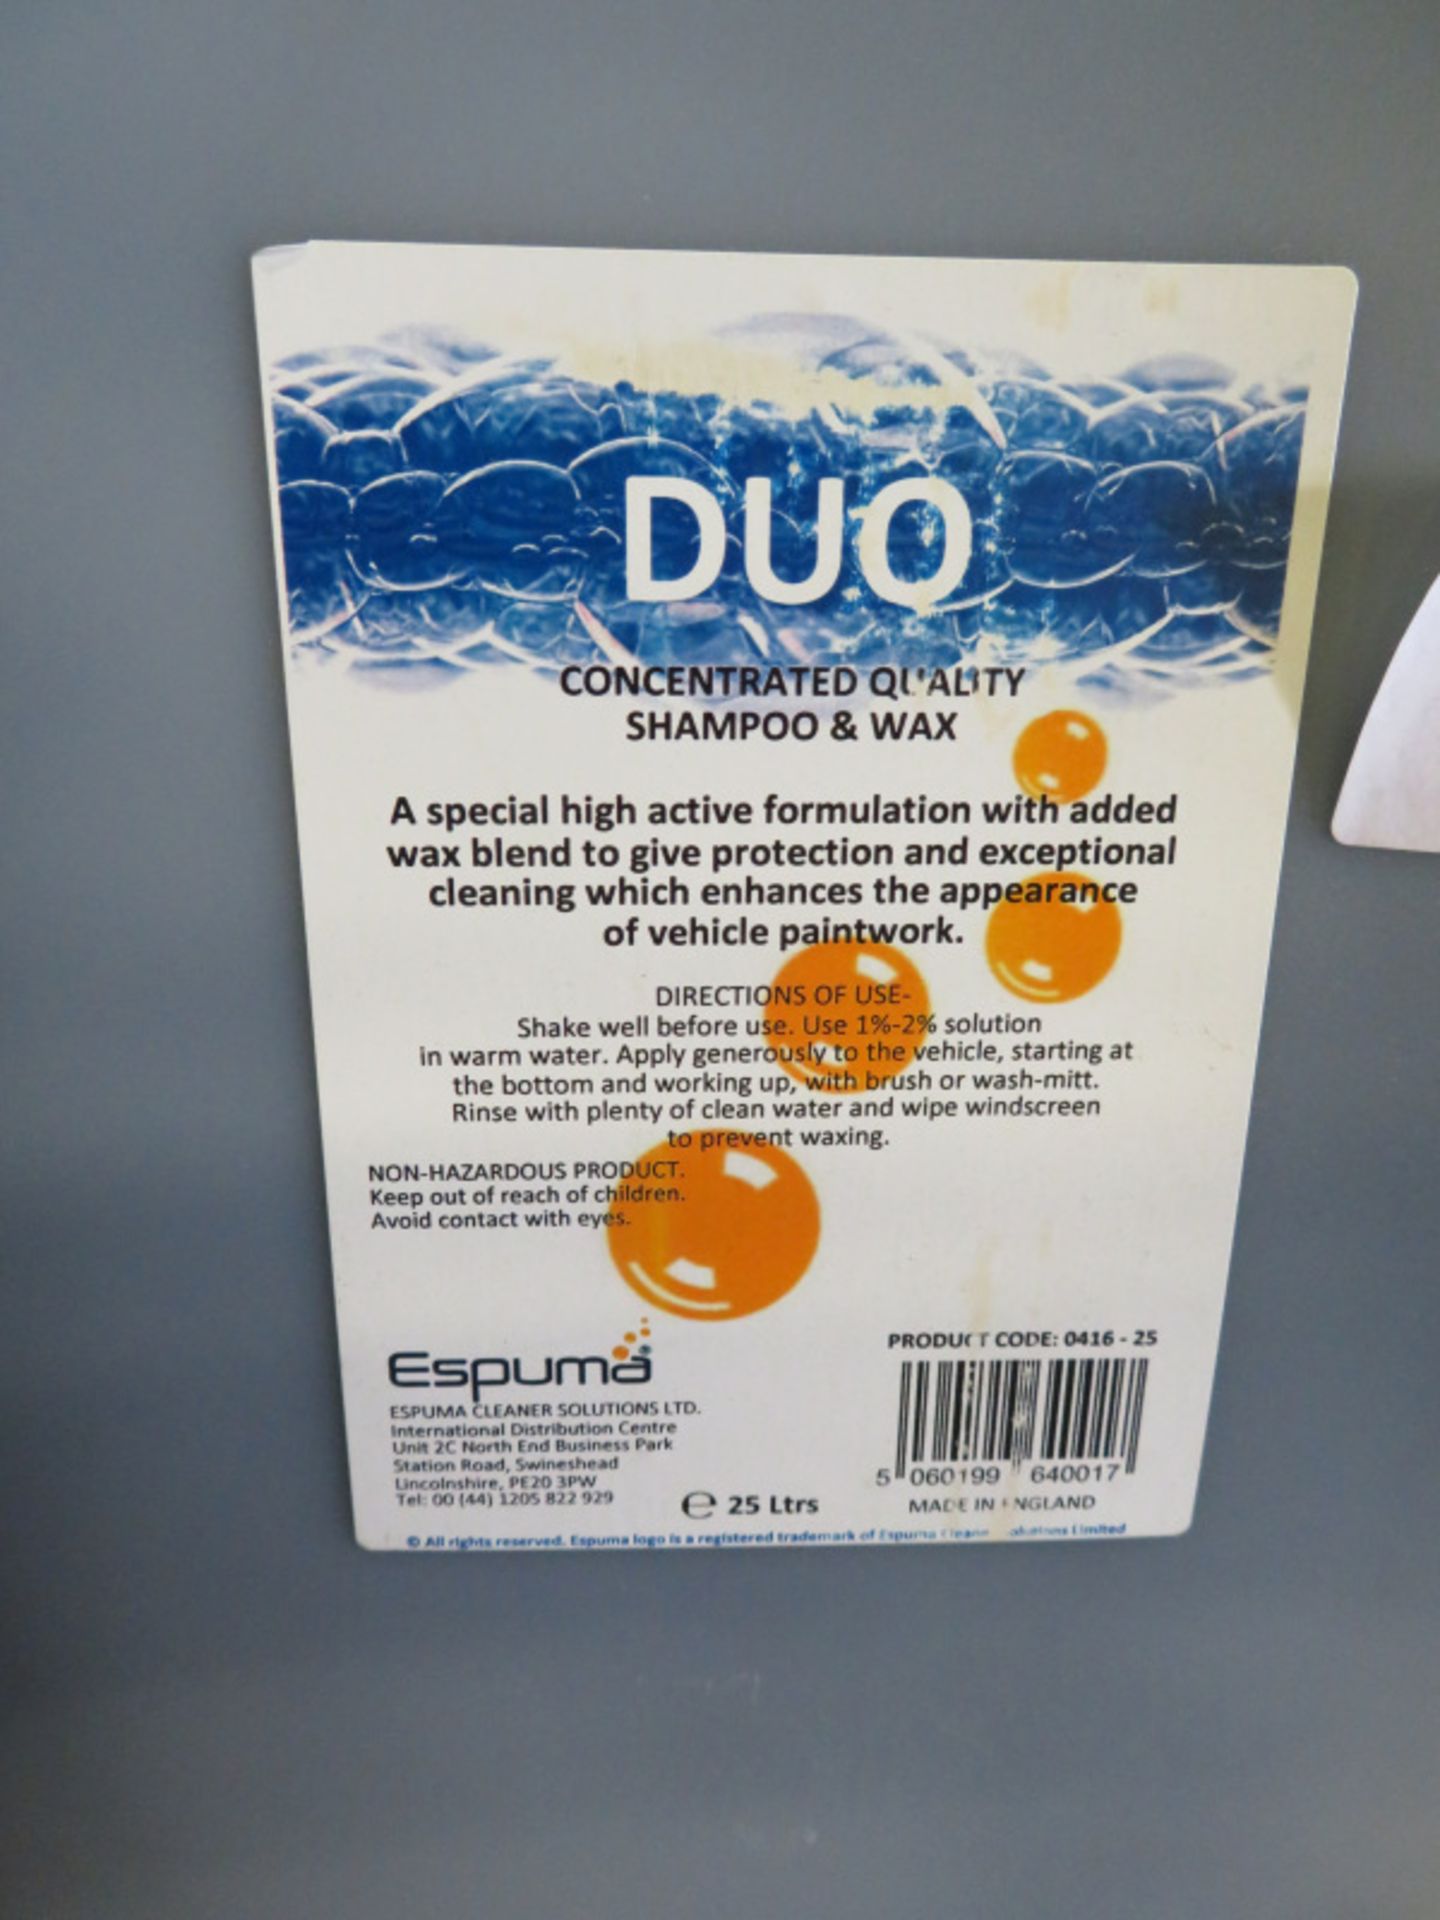 DUO concentrated shampoo & wax - 25LTR - 6 bottles - Image 2 of 3